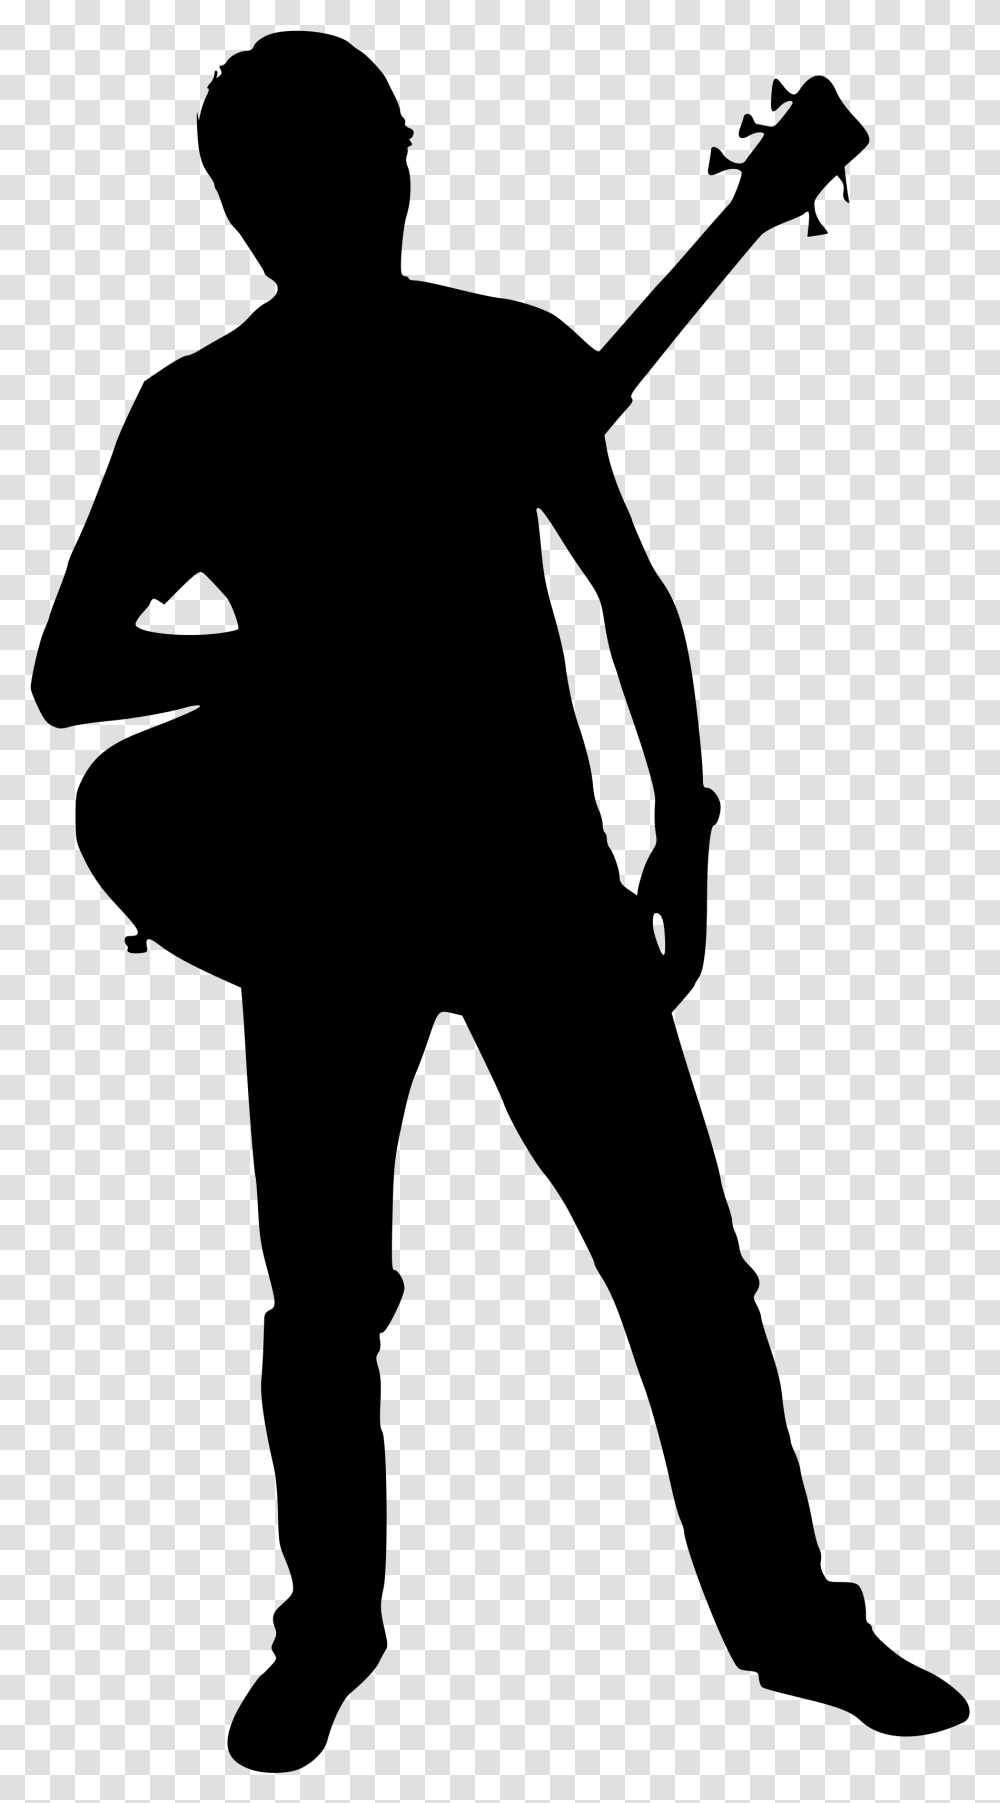 File Band Silhouette 06 Svg Wikimedia Commons Kidz Rock, Gray, World Of Warcraft Transparent Png